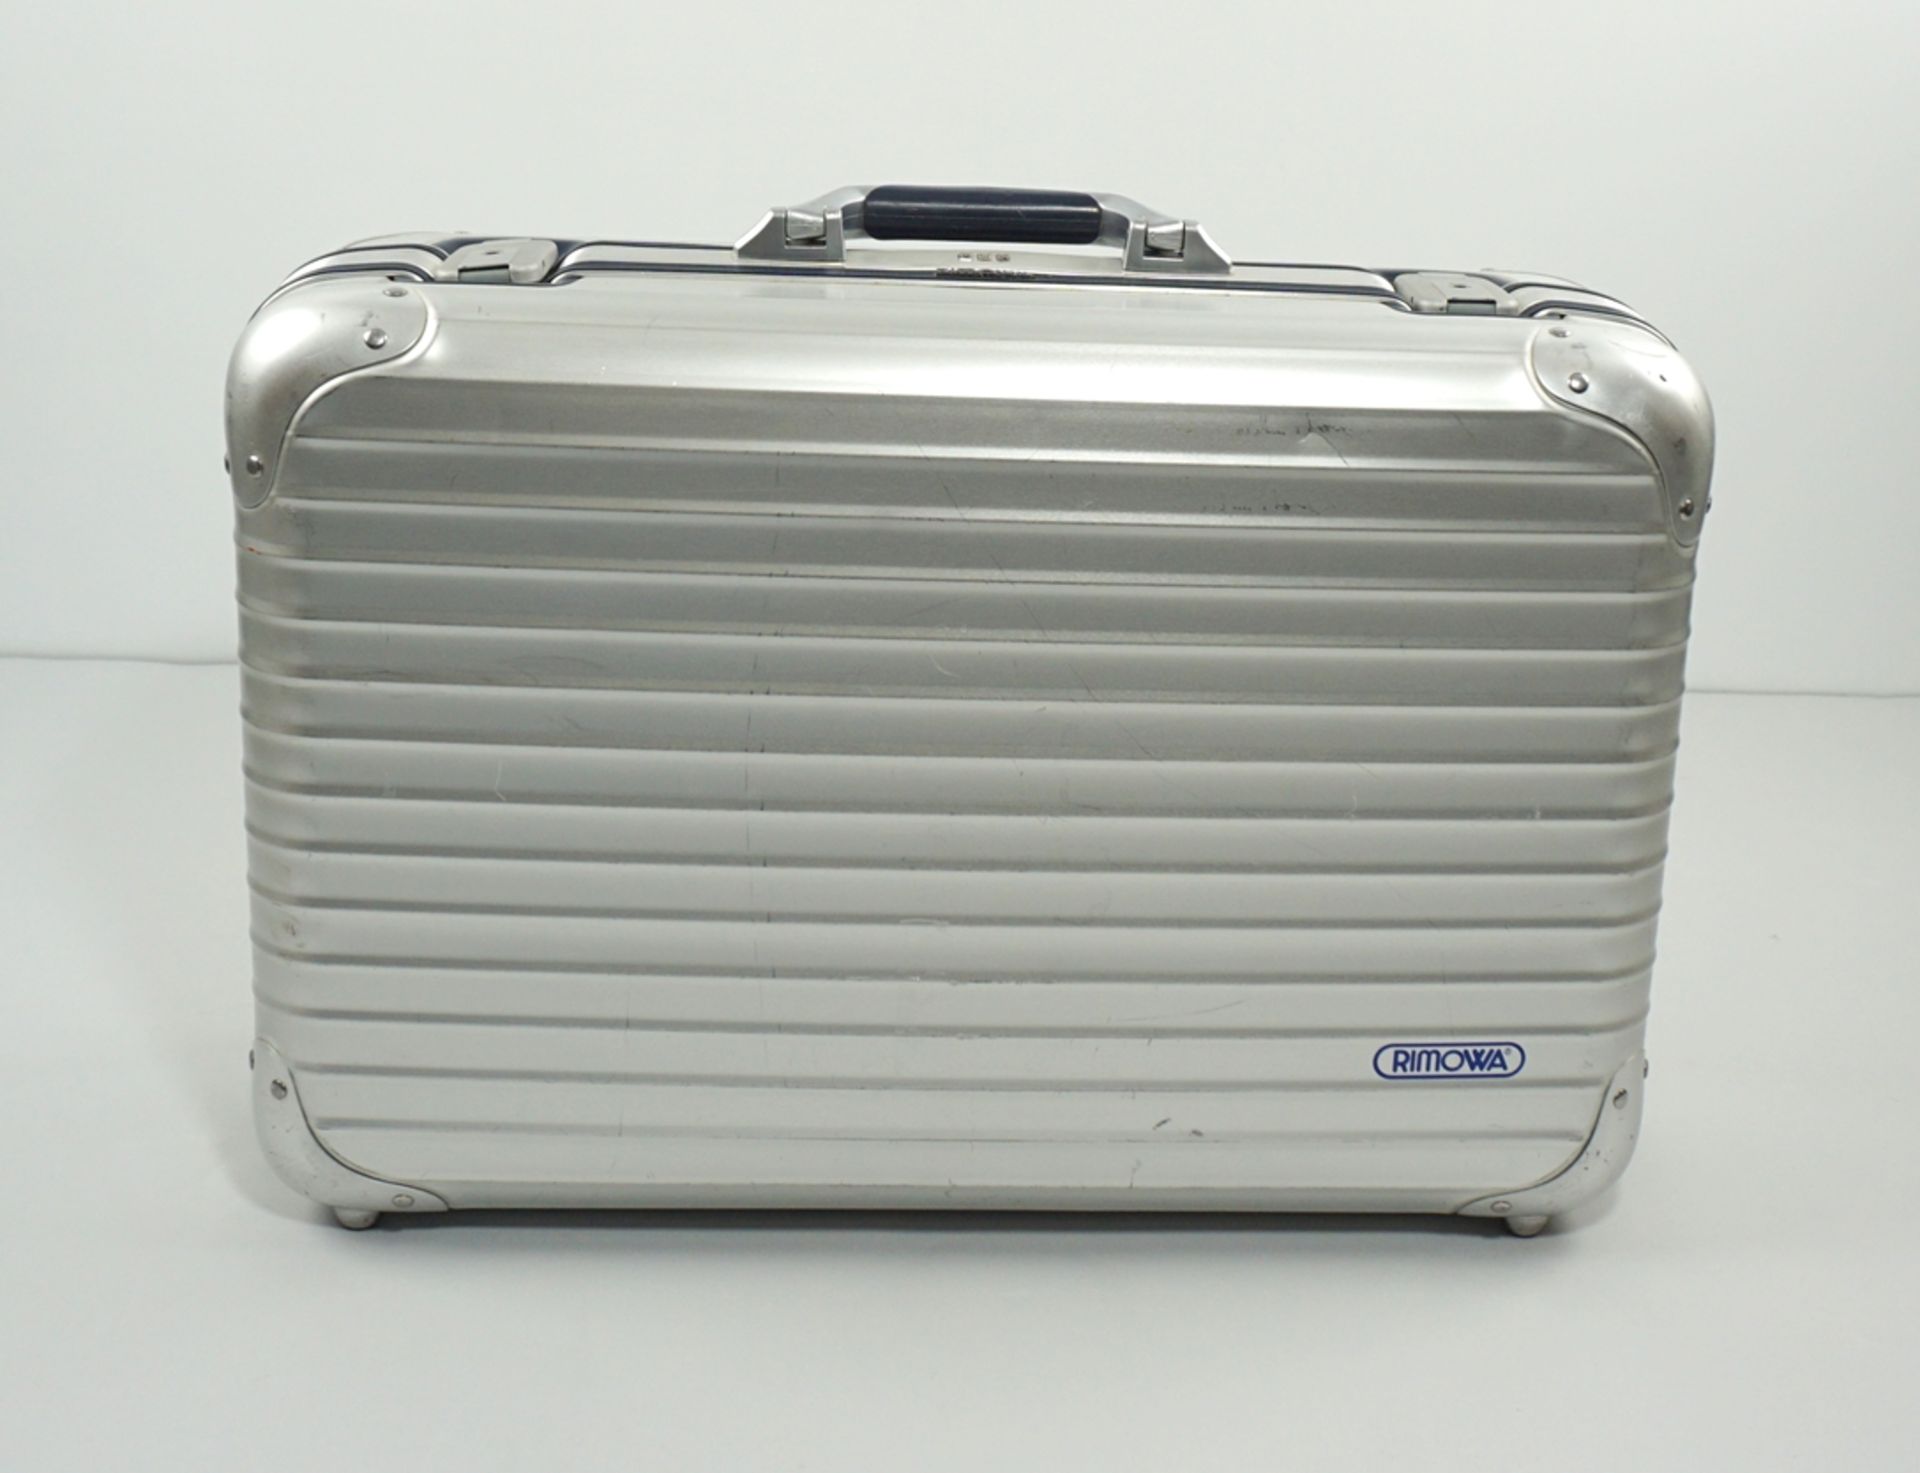 RIMOWA Handkoffer/ Bord-Case, Serie Silver Integral, Anfang 1990er Jahre - Image 2 of 4